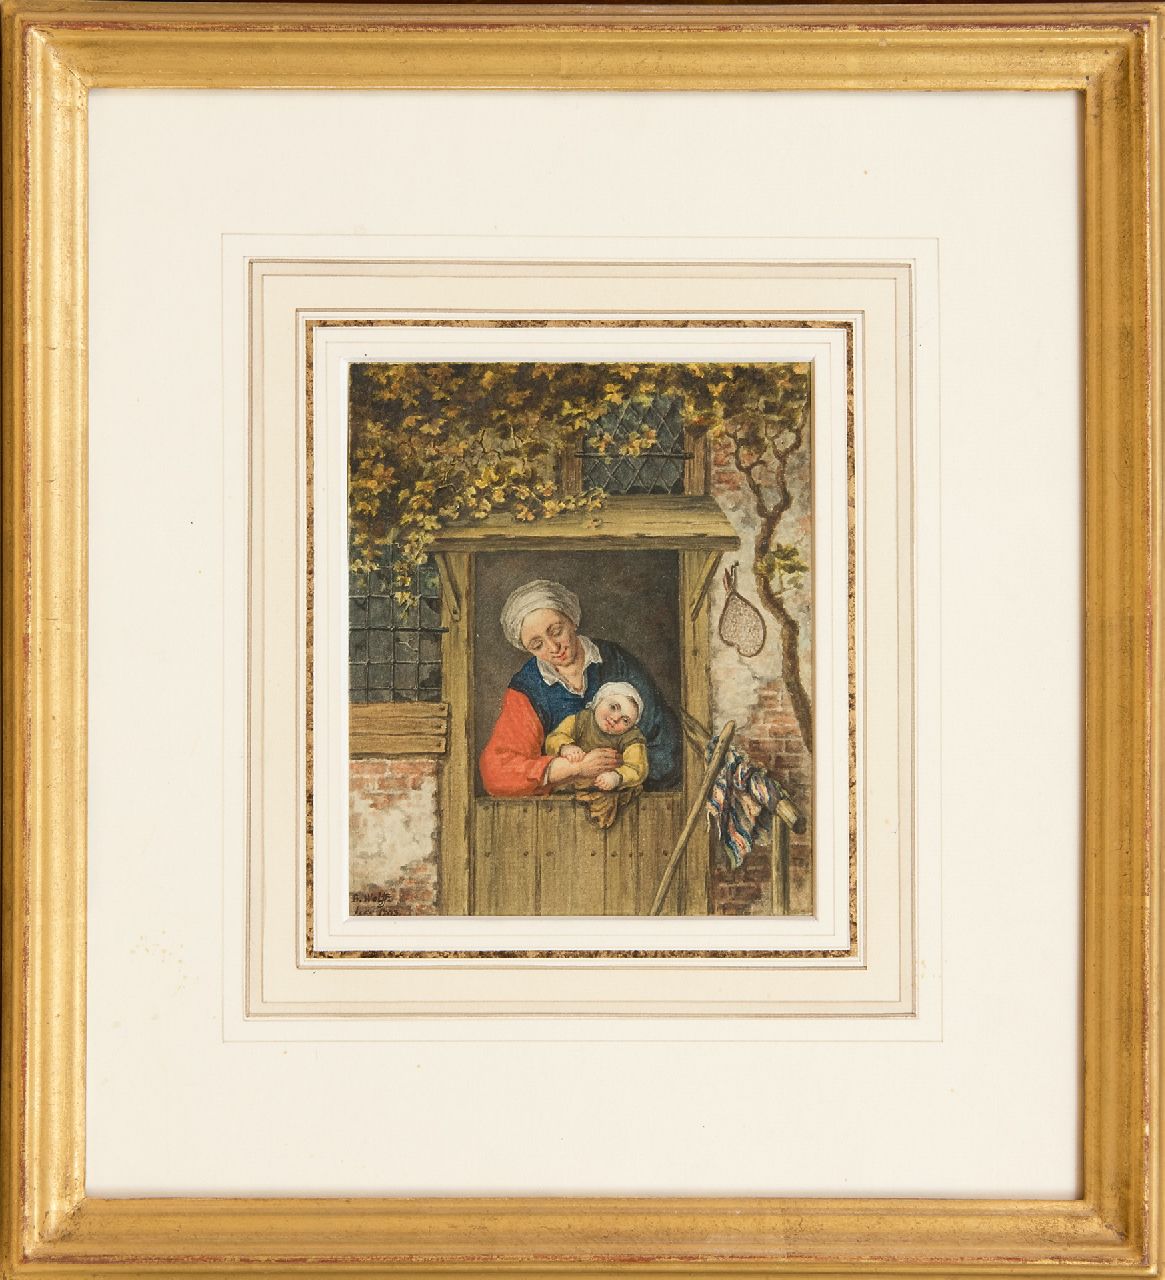 Wolff B.  | Benjamin Wolff | Watercolours and drawings offered for sale | A farmer's wife with her child in a doorway, watercolour on paper 14.2 x 12.3 cm, signed l.l. and dated 1793